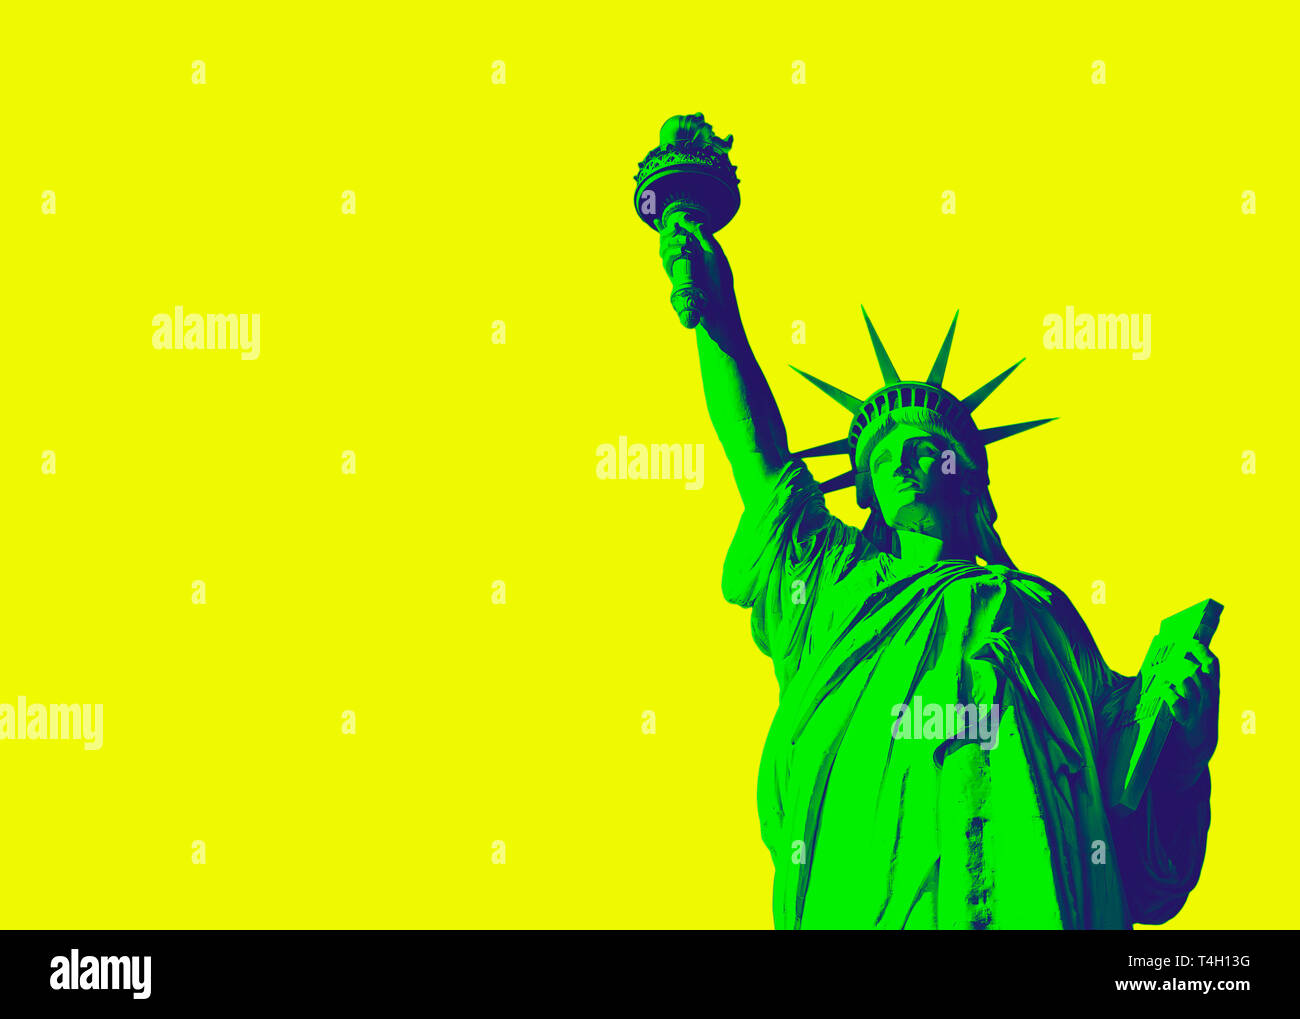 Bottom view of the famous Statue of Liberty, icon of freedom and of the United States. Yellow and green duo tone effect applied Stock Photo